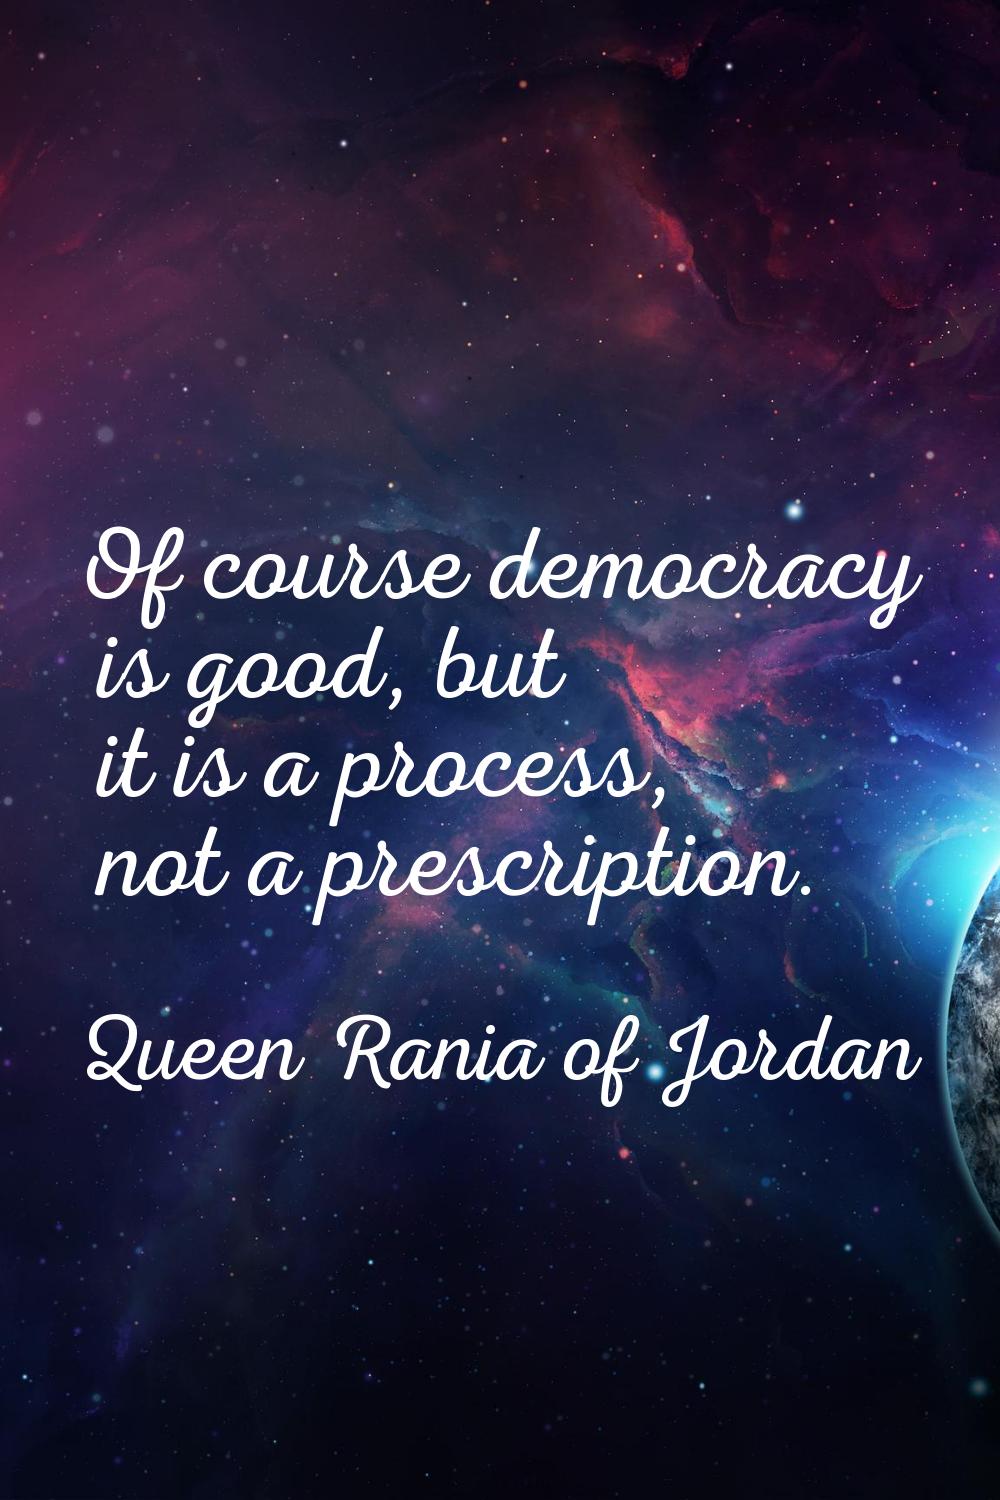 Of course democracy is good, but it is a process, not a prescription.